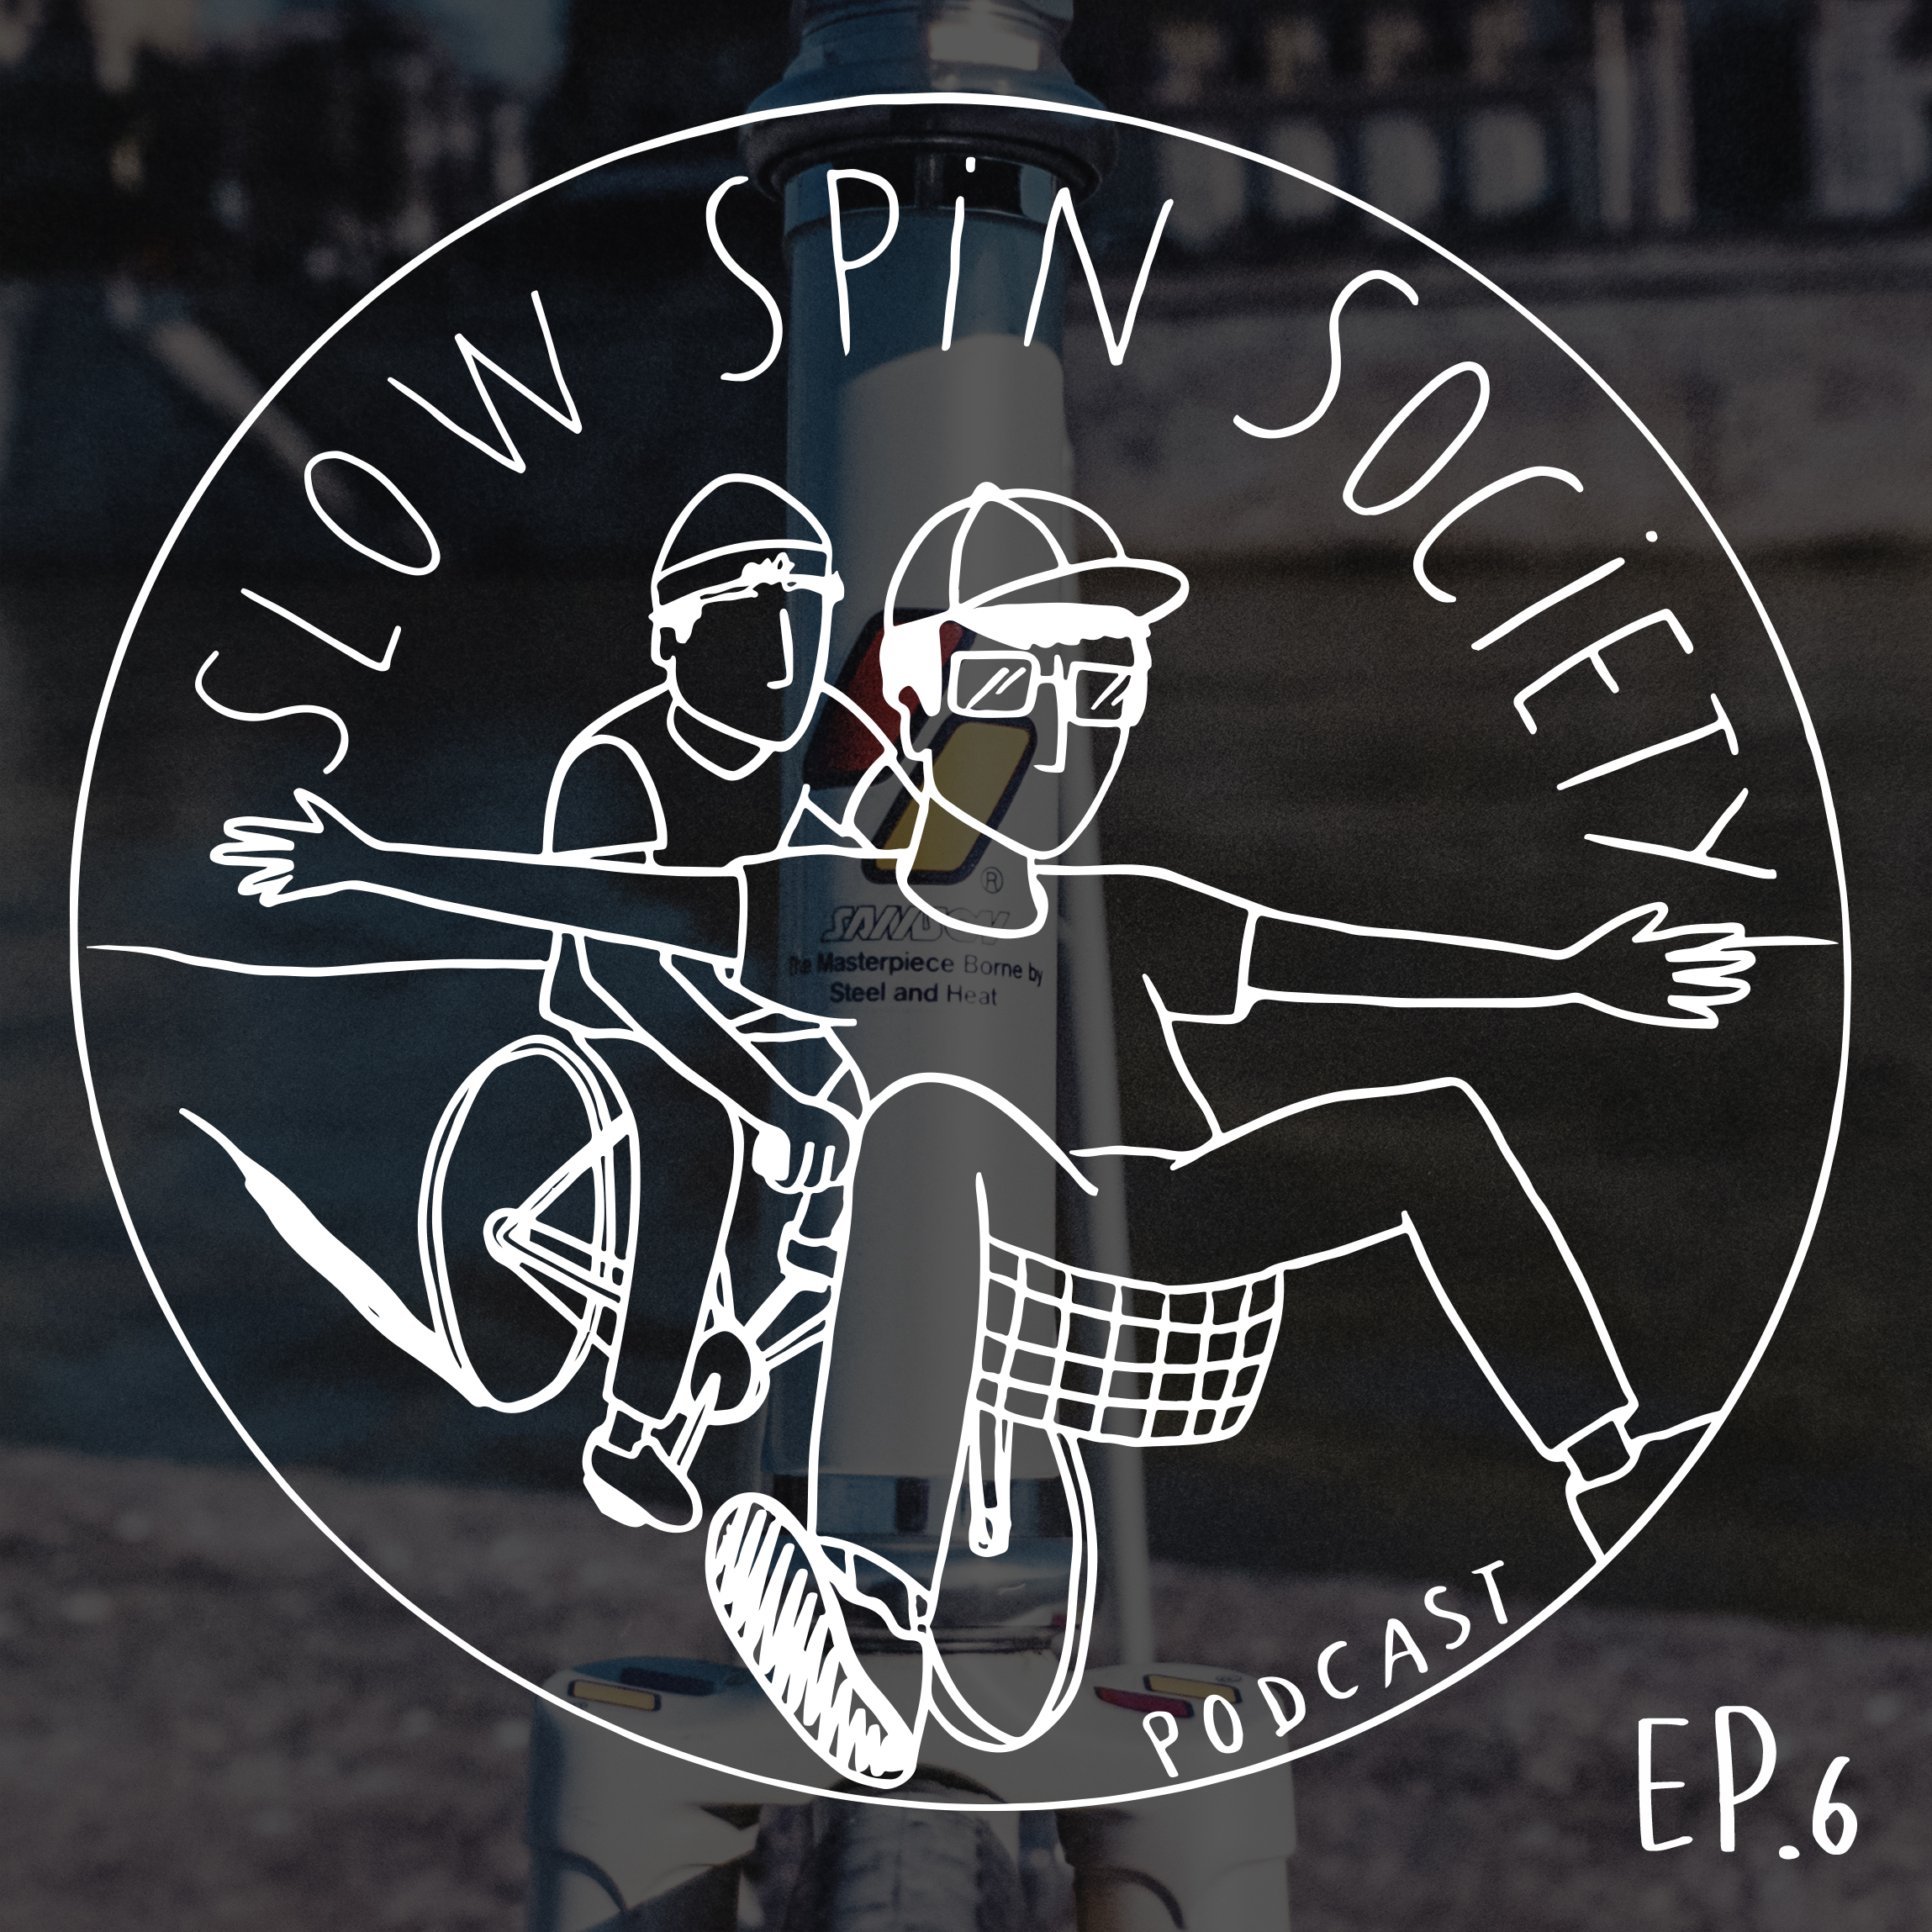 The Slow Spin Society Podcast Ep.6 : NJS, Keirin and rising sun heritage